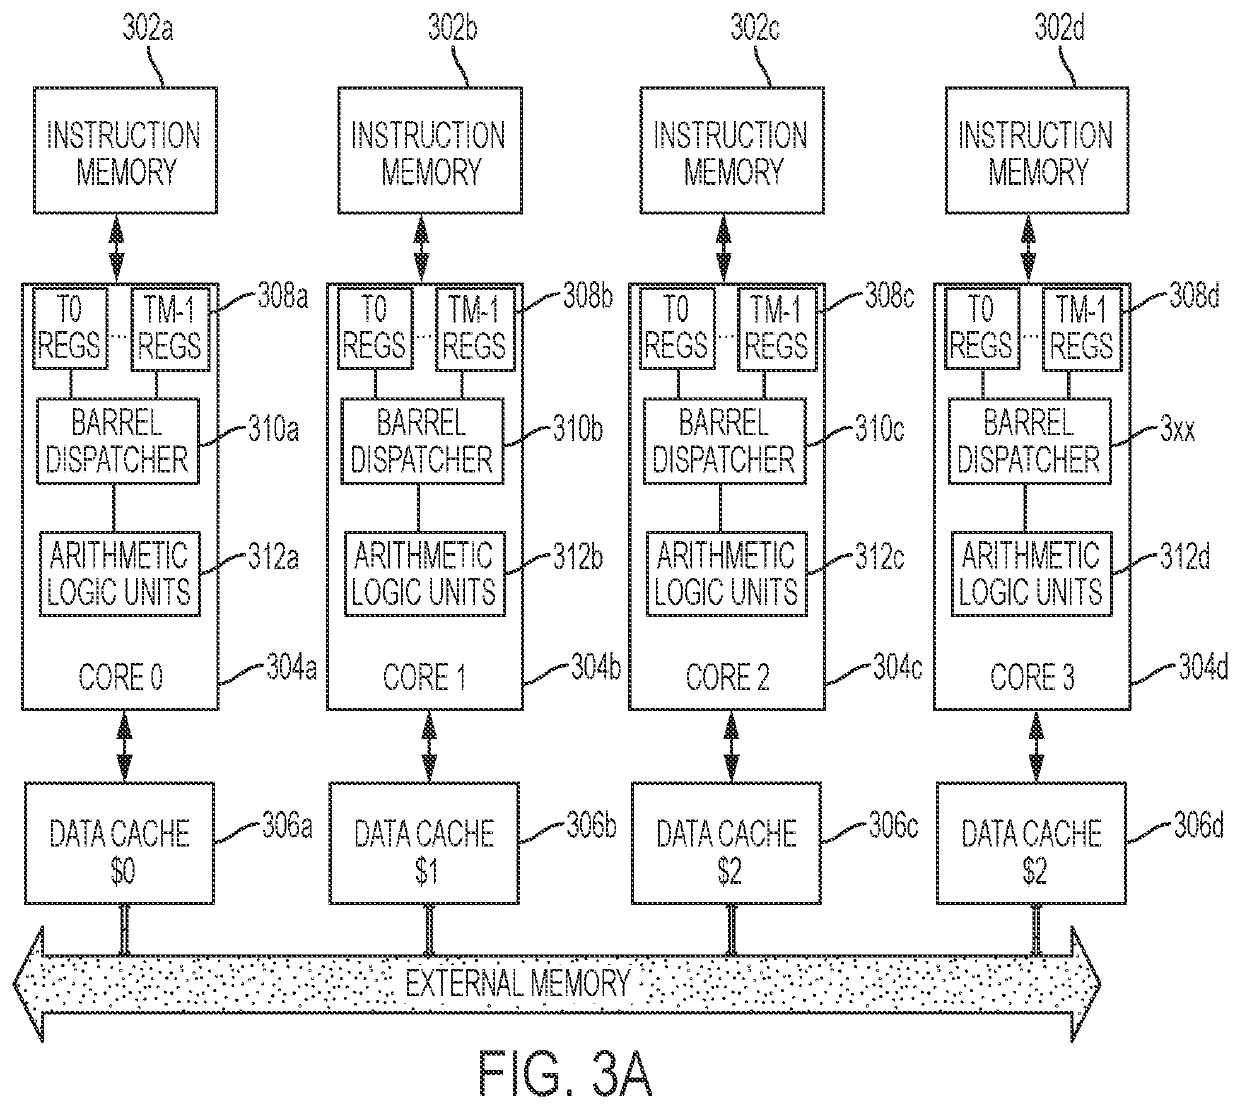 Multiple multithreaded processors with shared data cache